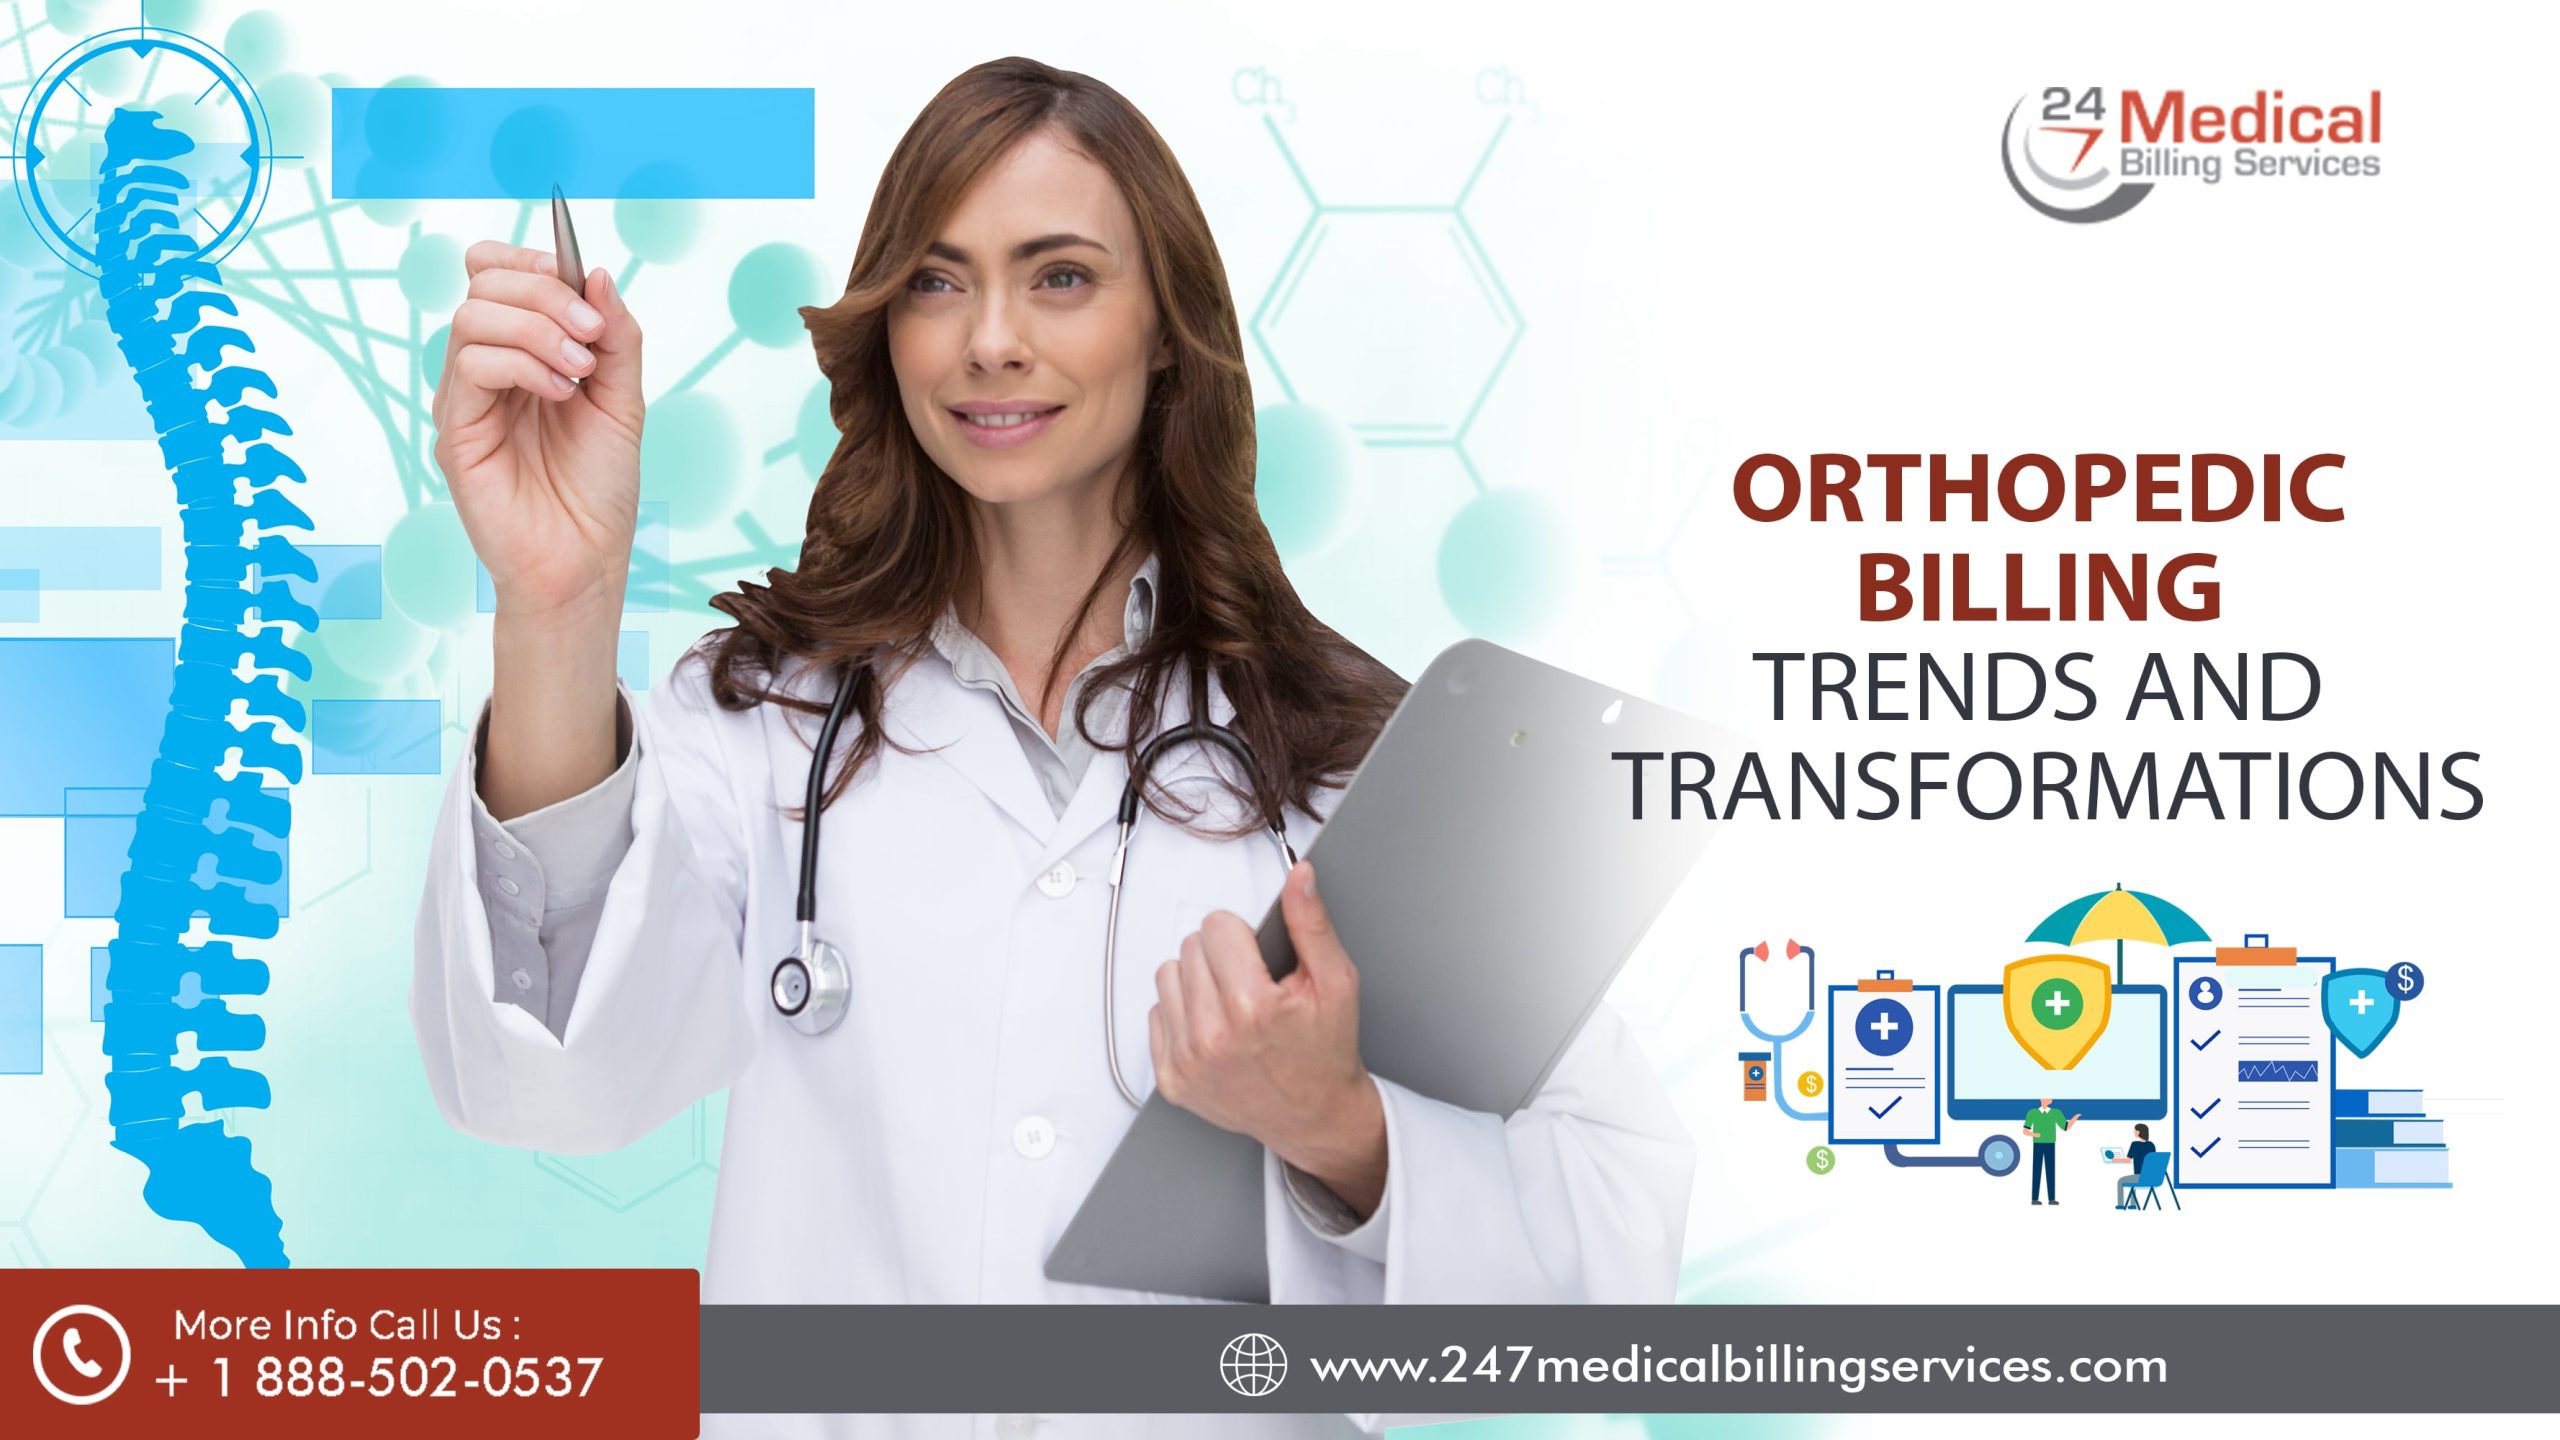  Orthopedic Billing Trends and Transformations